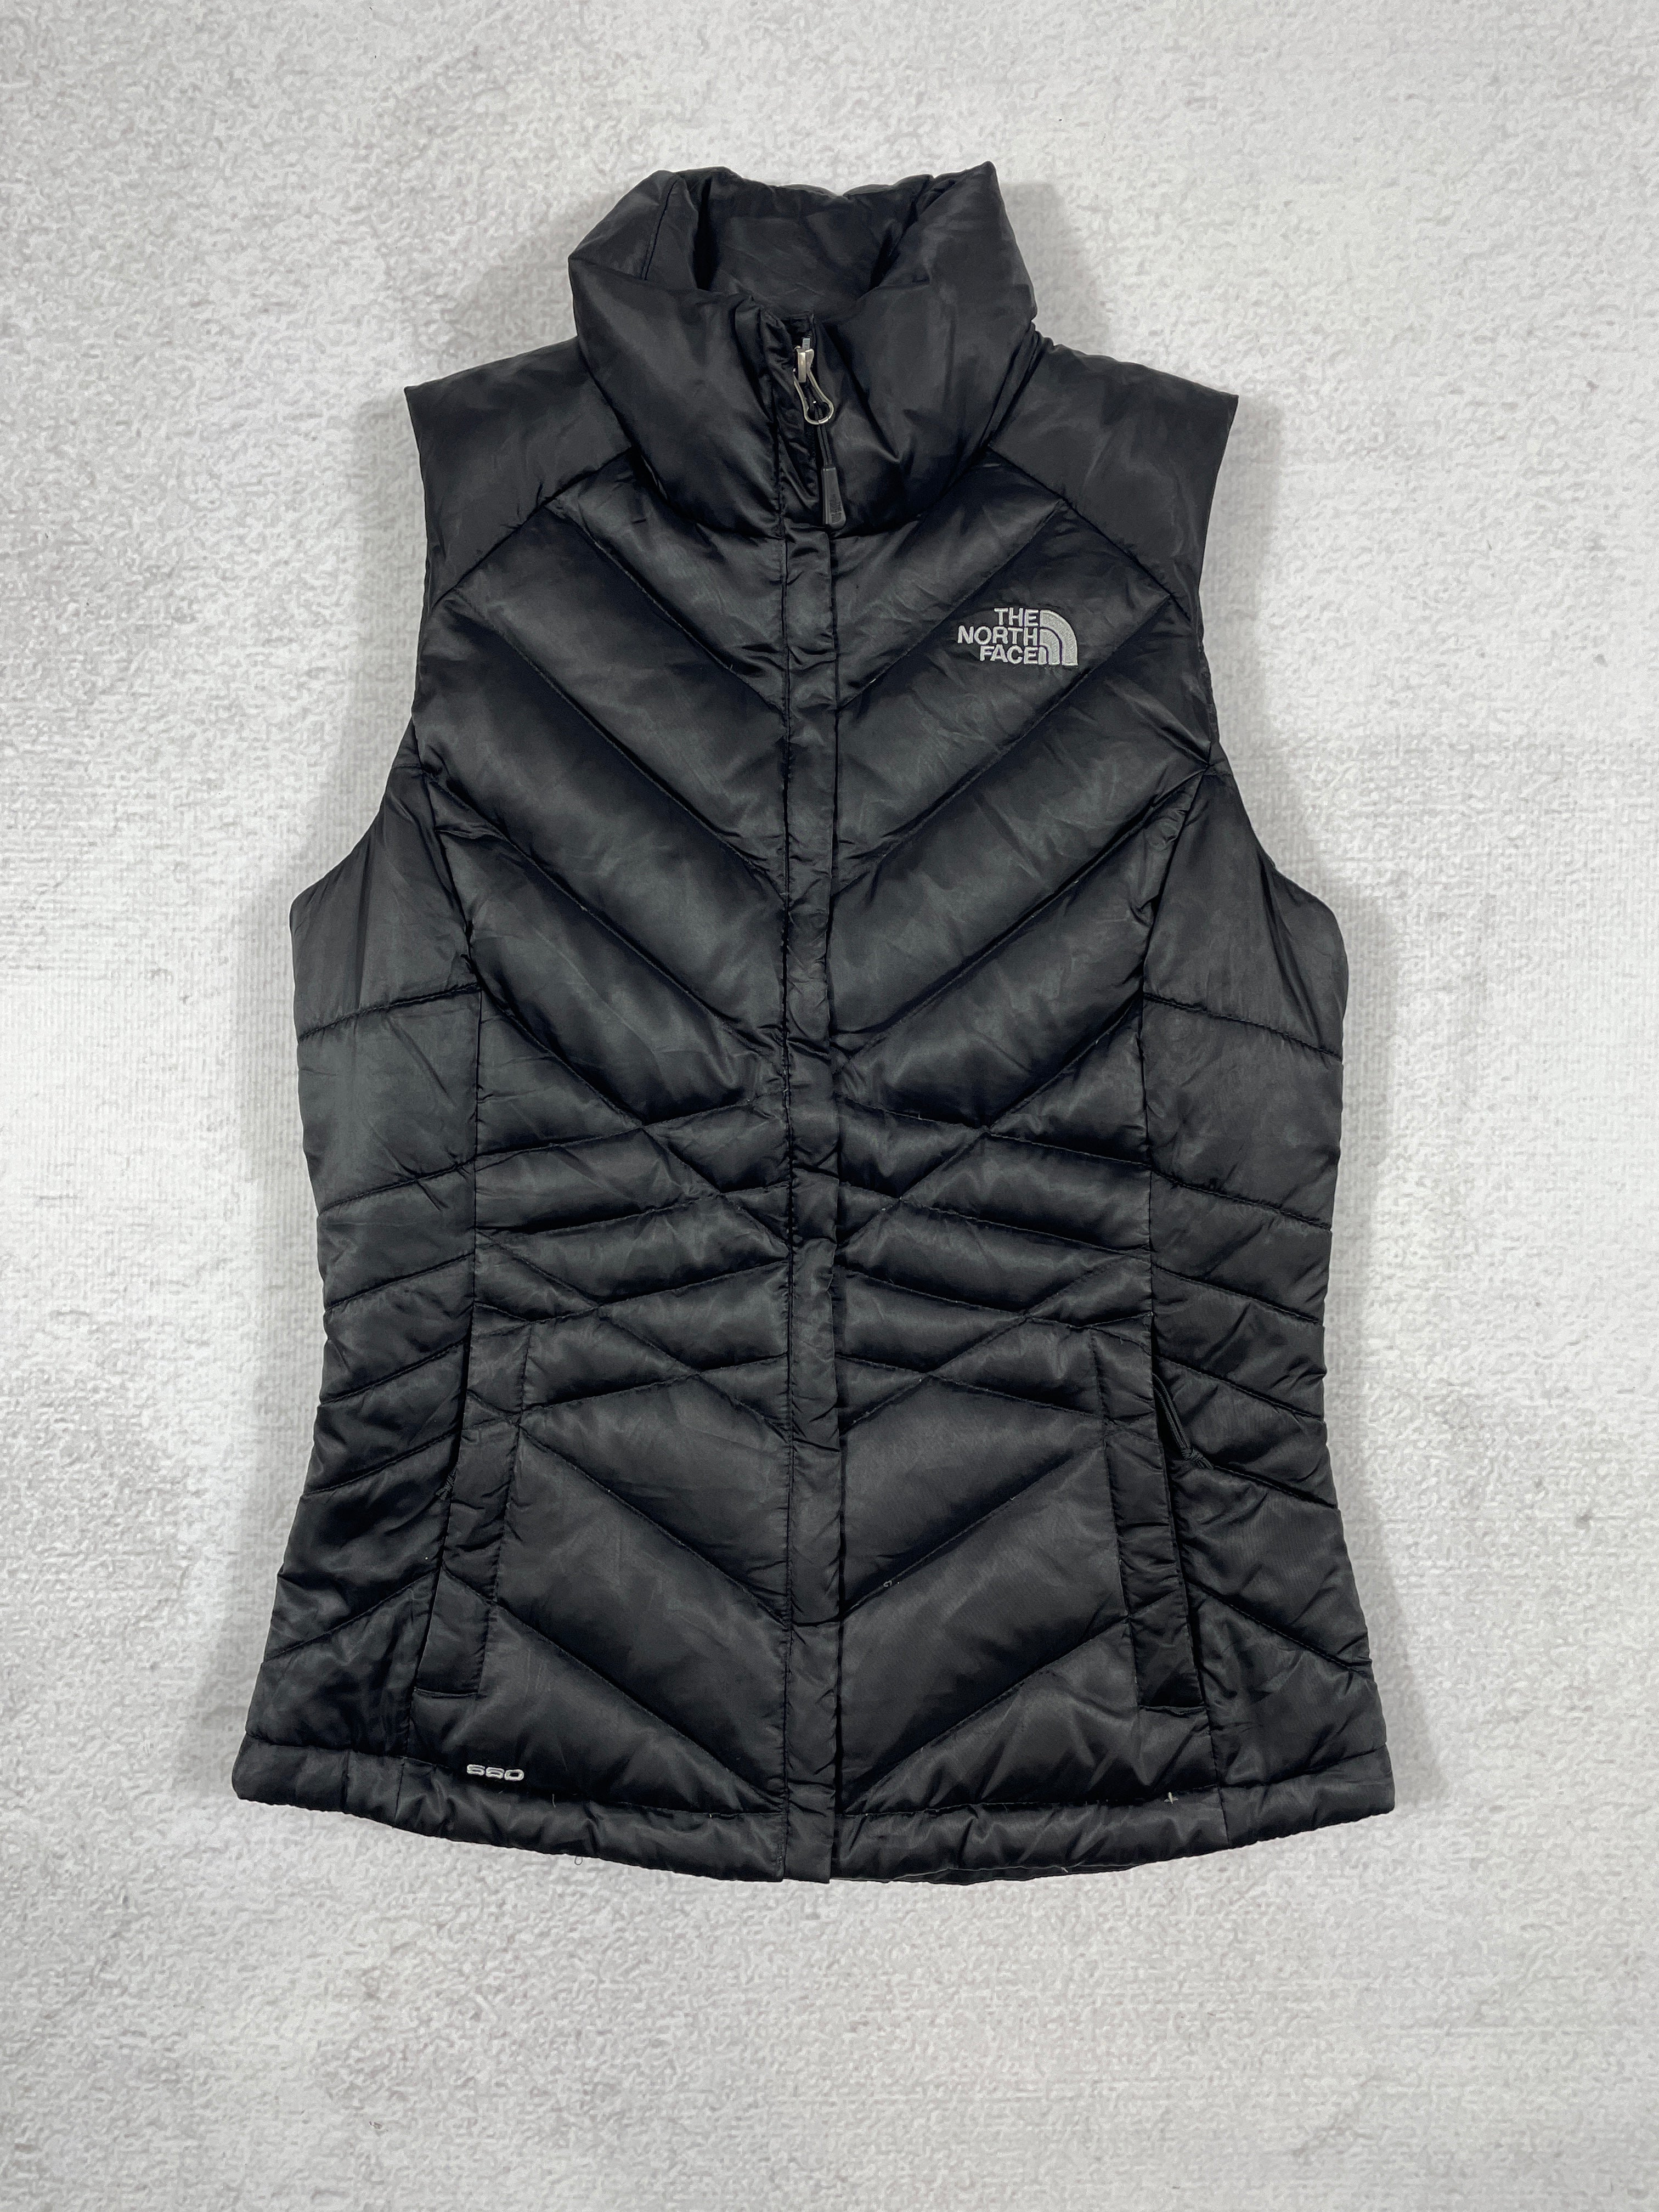 Vintage The North Face 550 Series Puffer Vest - Women's XS